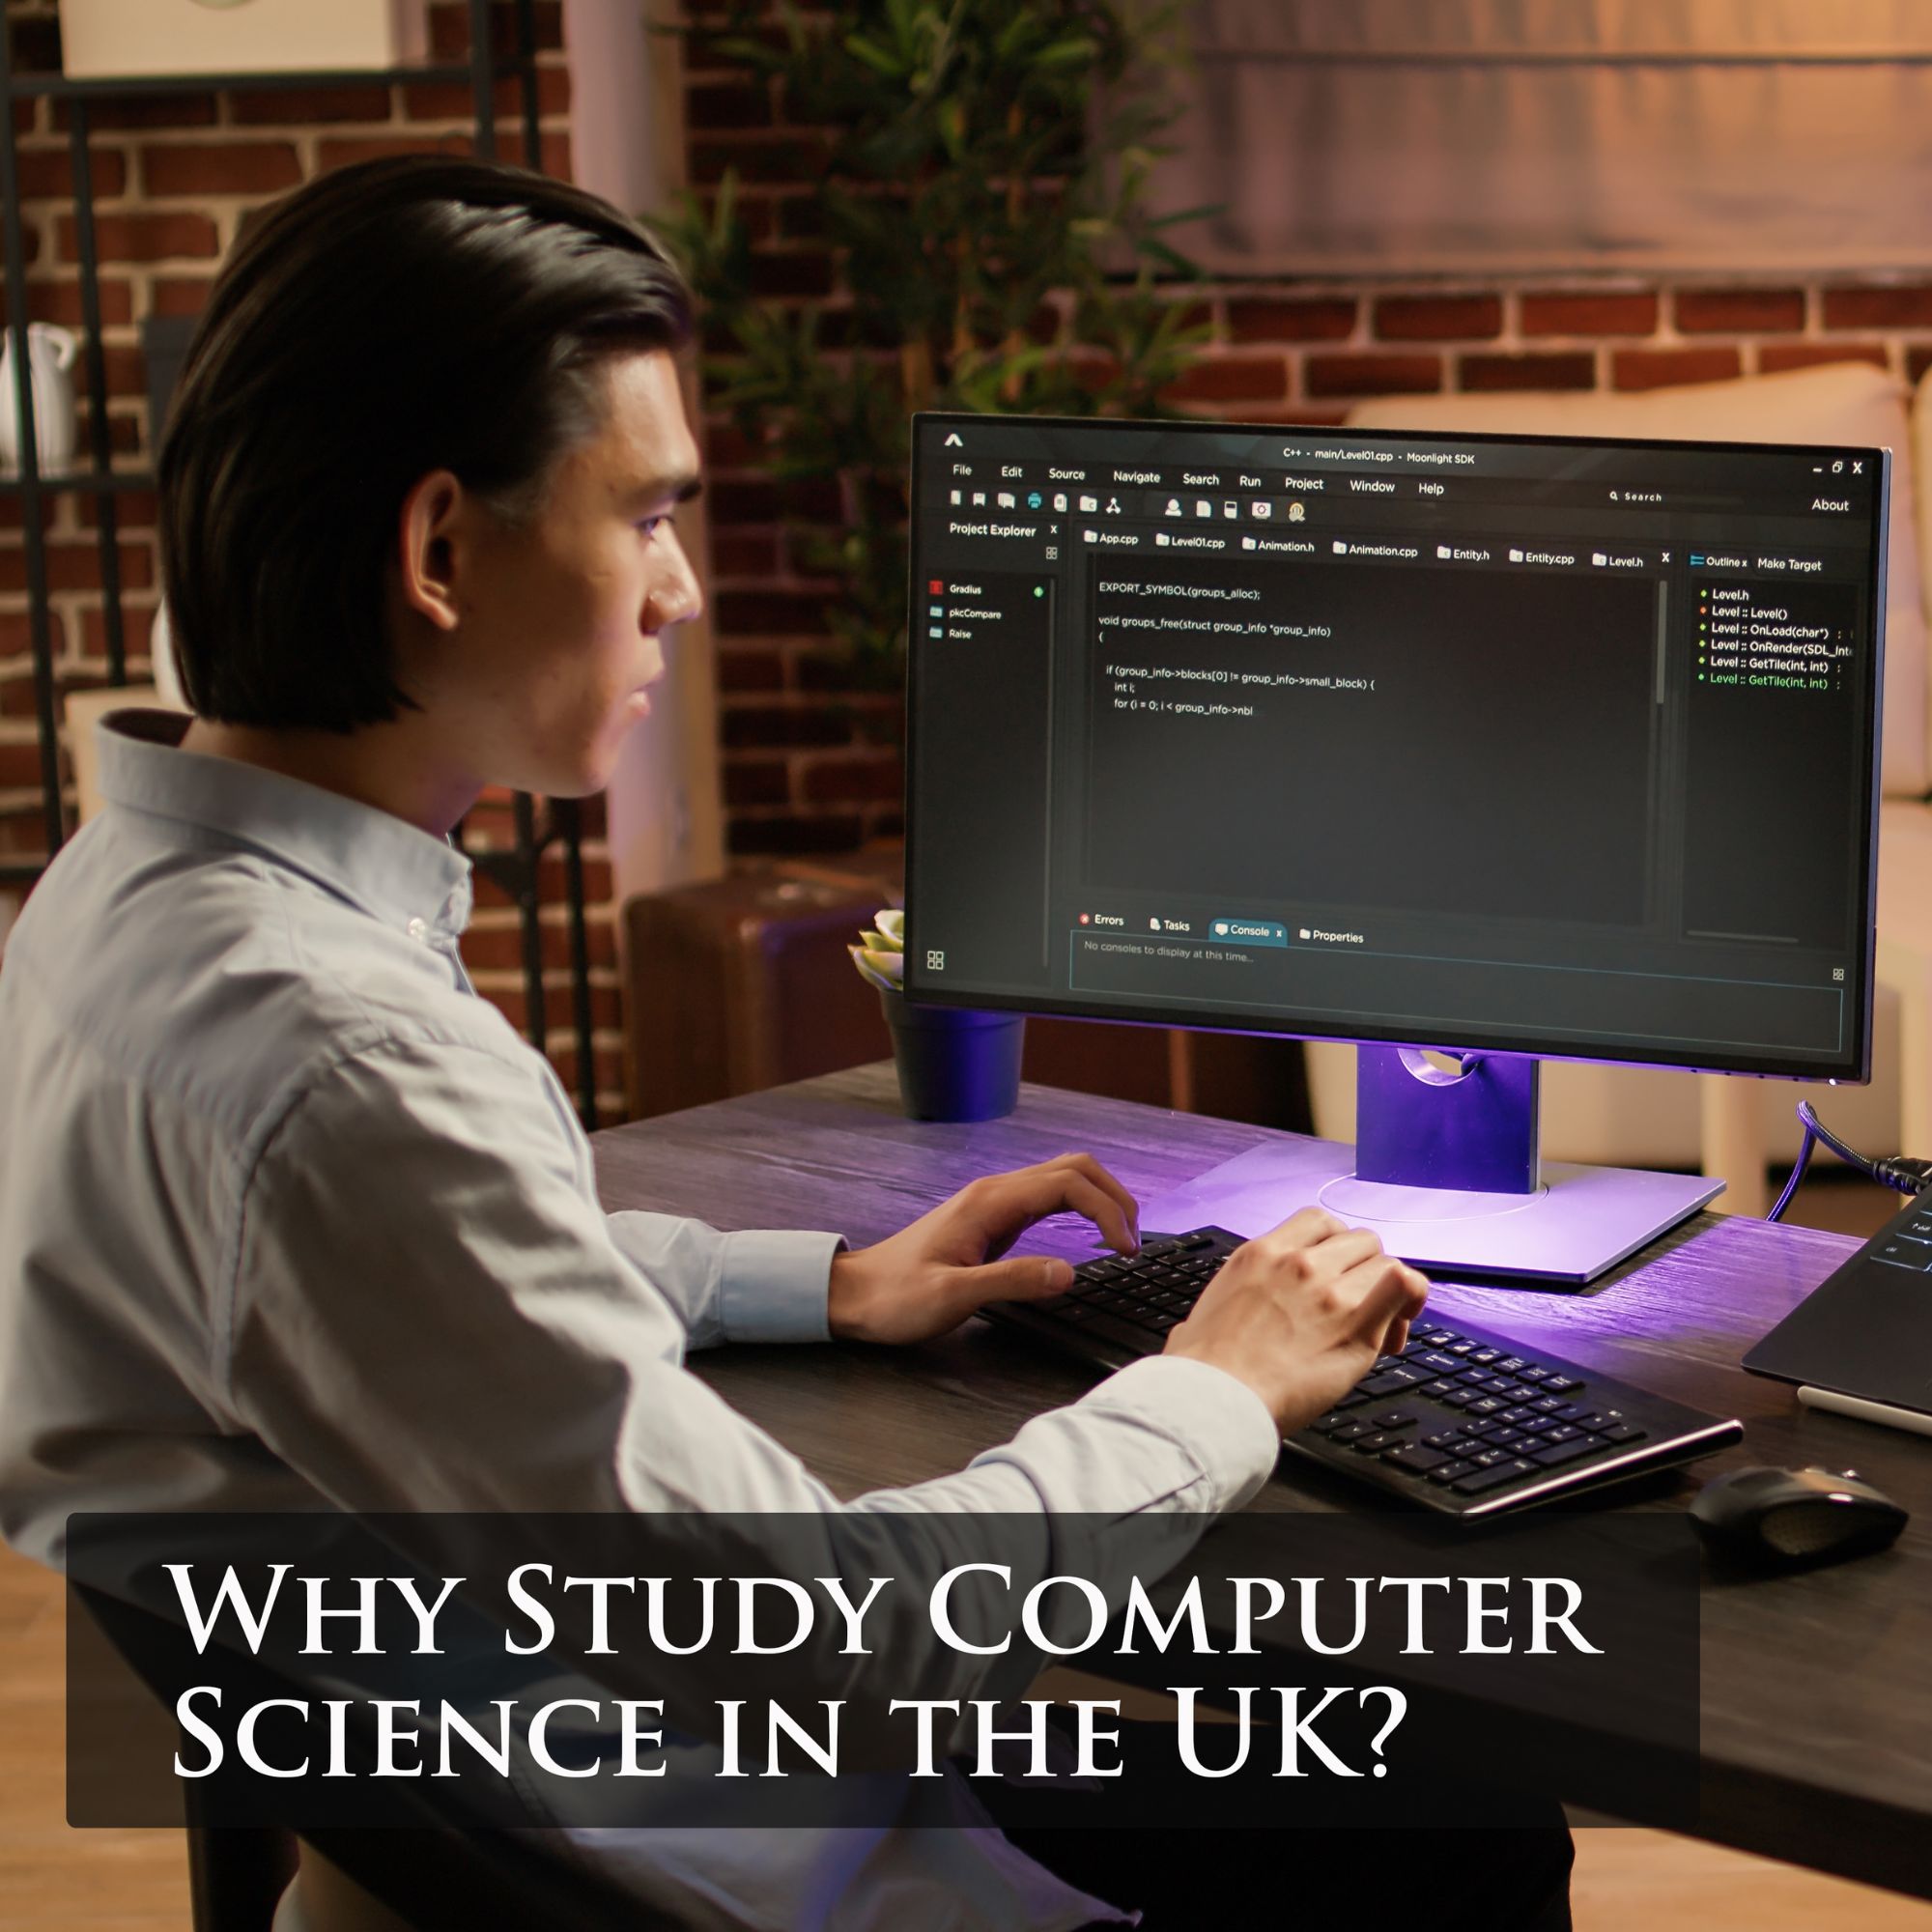 Why Study Computer Science in the UK?